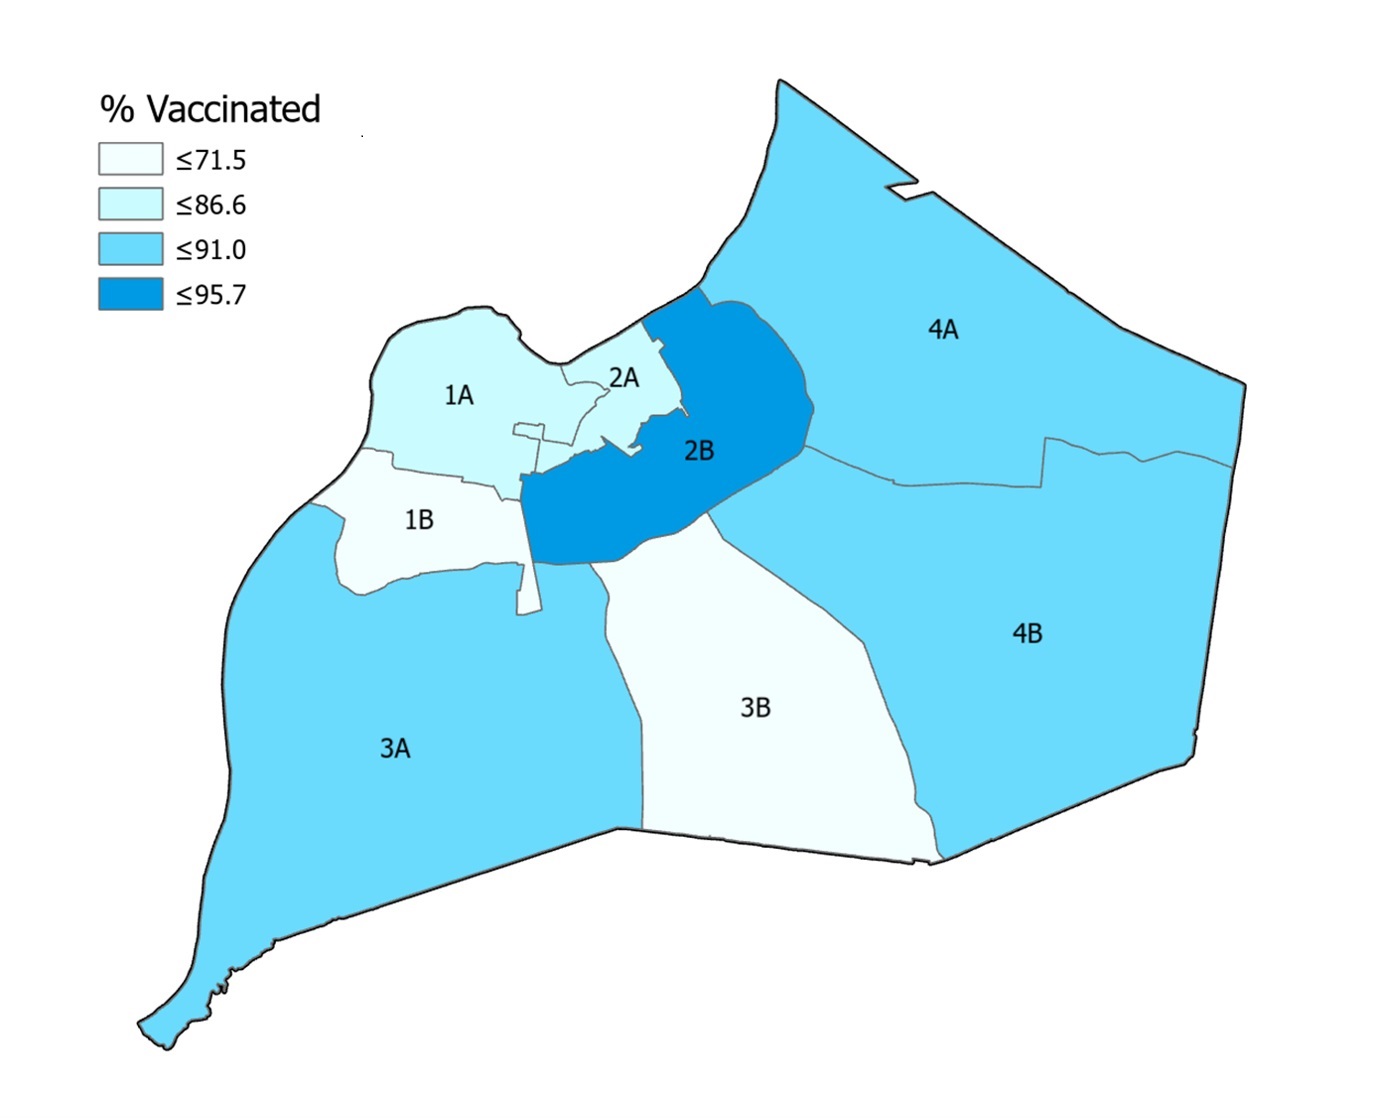 Figure 4 shows the percentage of tested individuals by zone who reported being vaccinated.